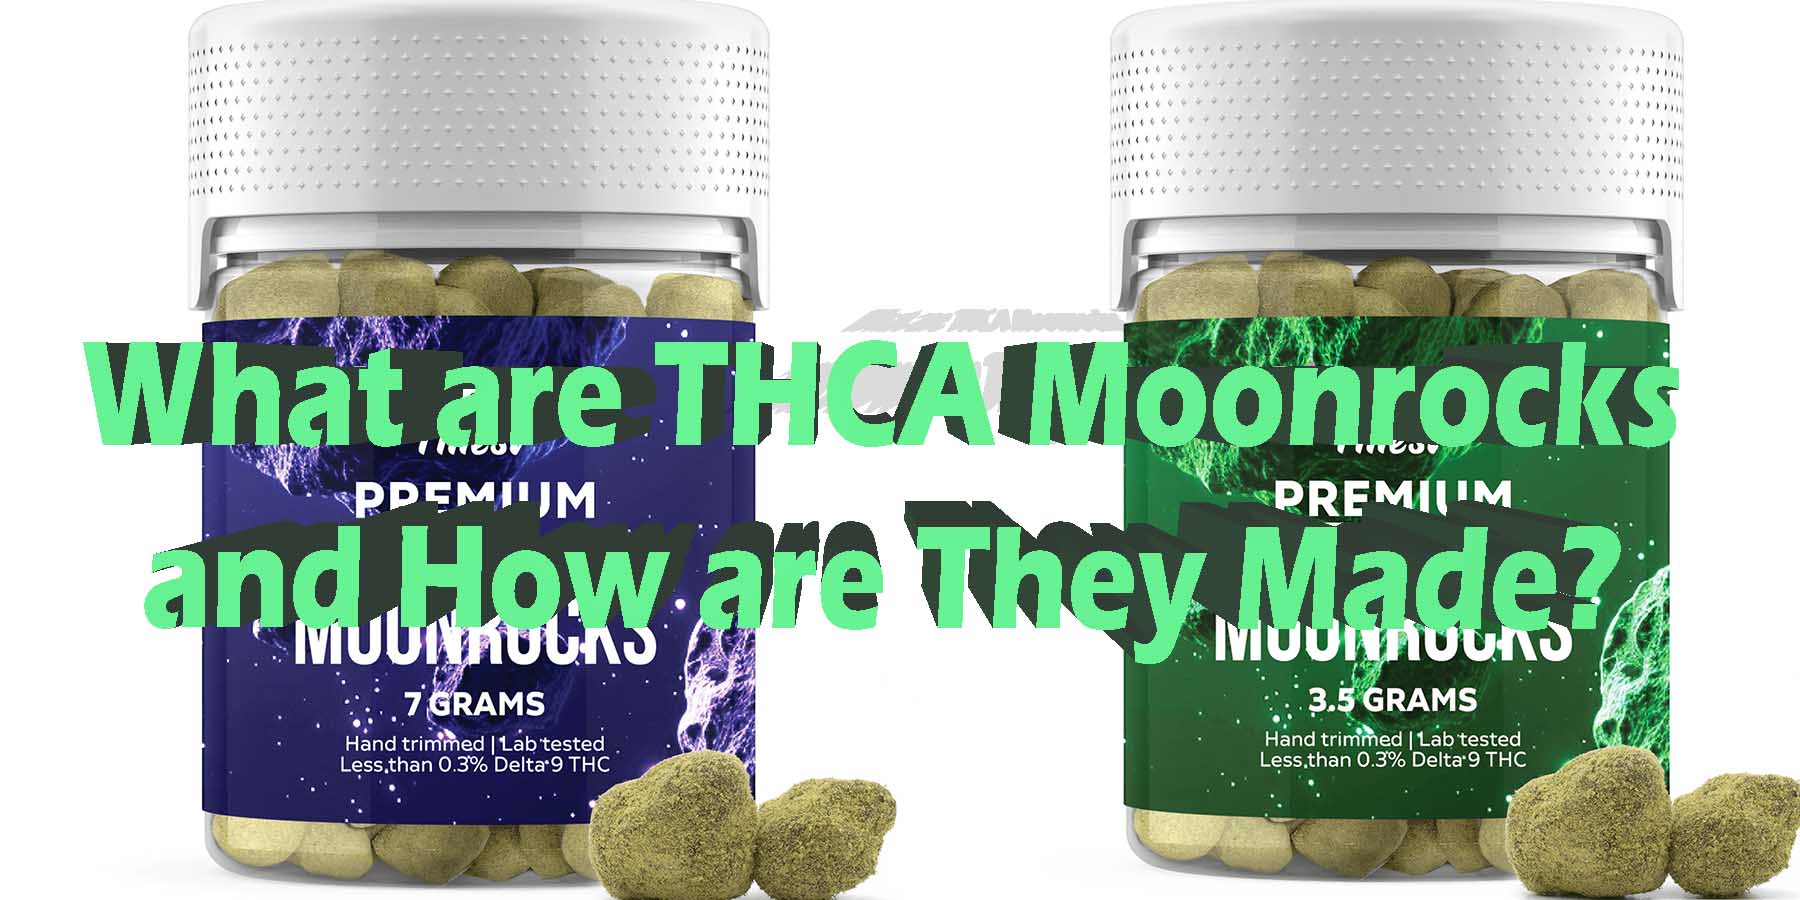 What are THCA Moonrocks and How are They Made THC LowestPrice Coupon Discount For Smoking Best High Smoke Shop Online Near Me StrongestBrand Bloomz